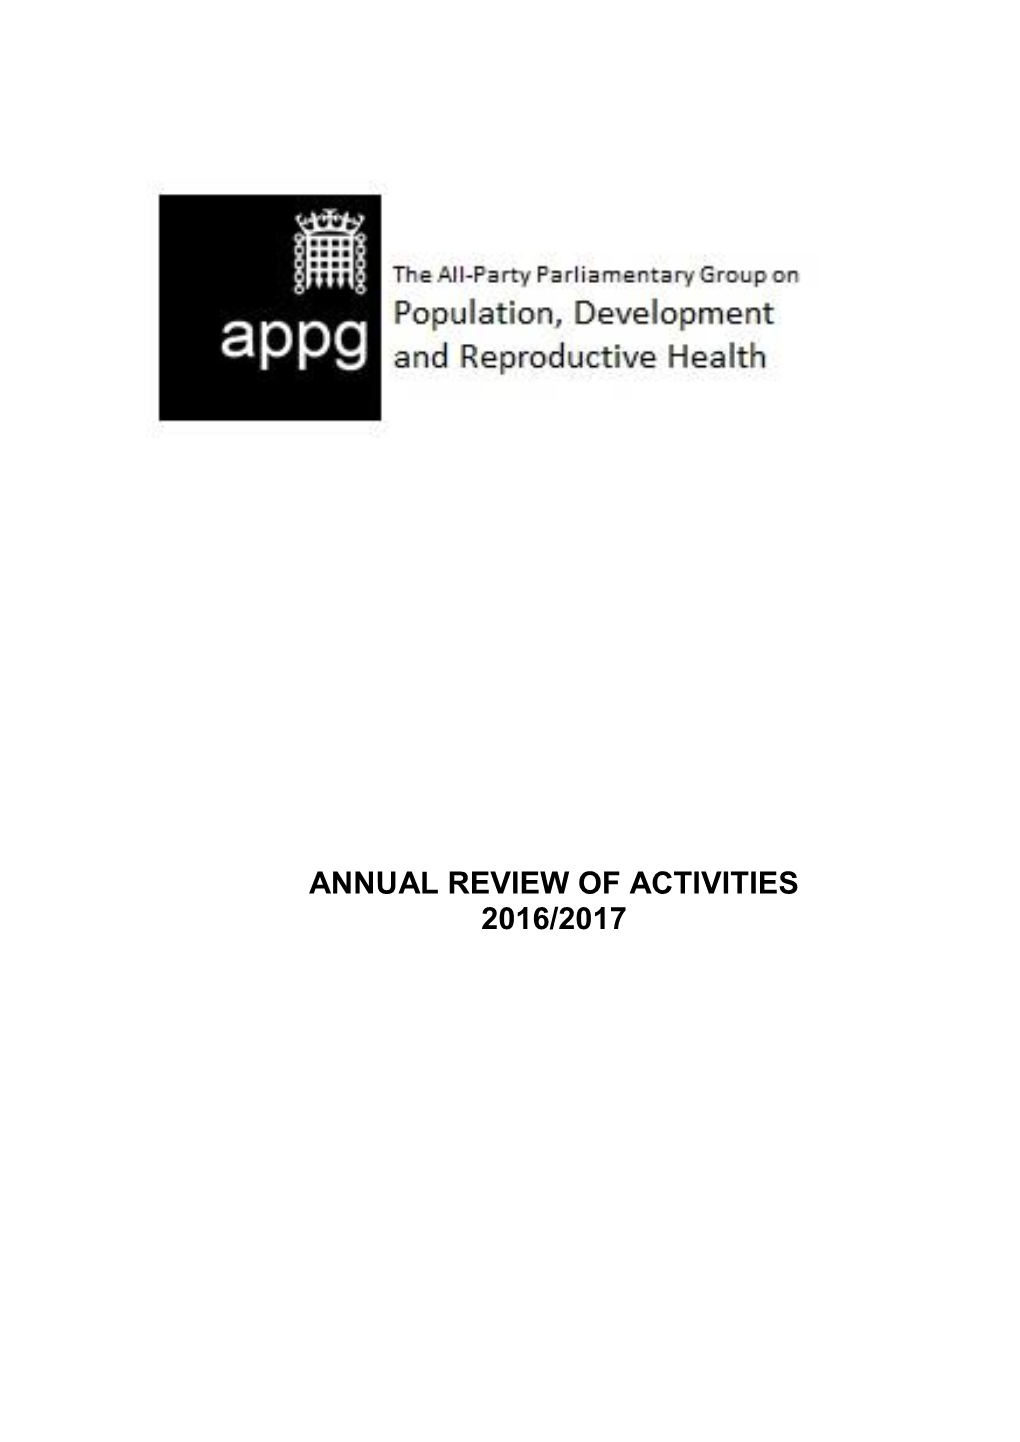 Annual Review of Activities 2016/2017